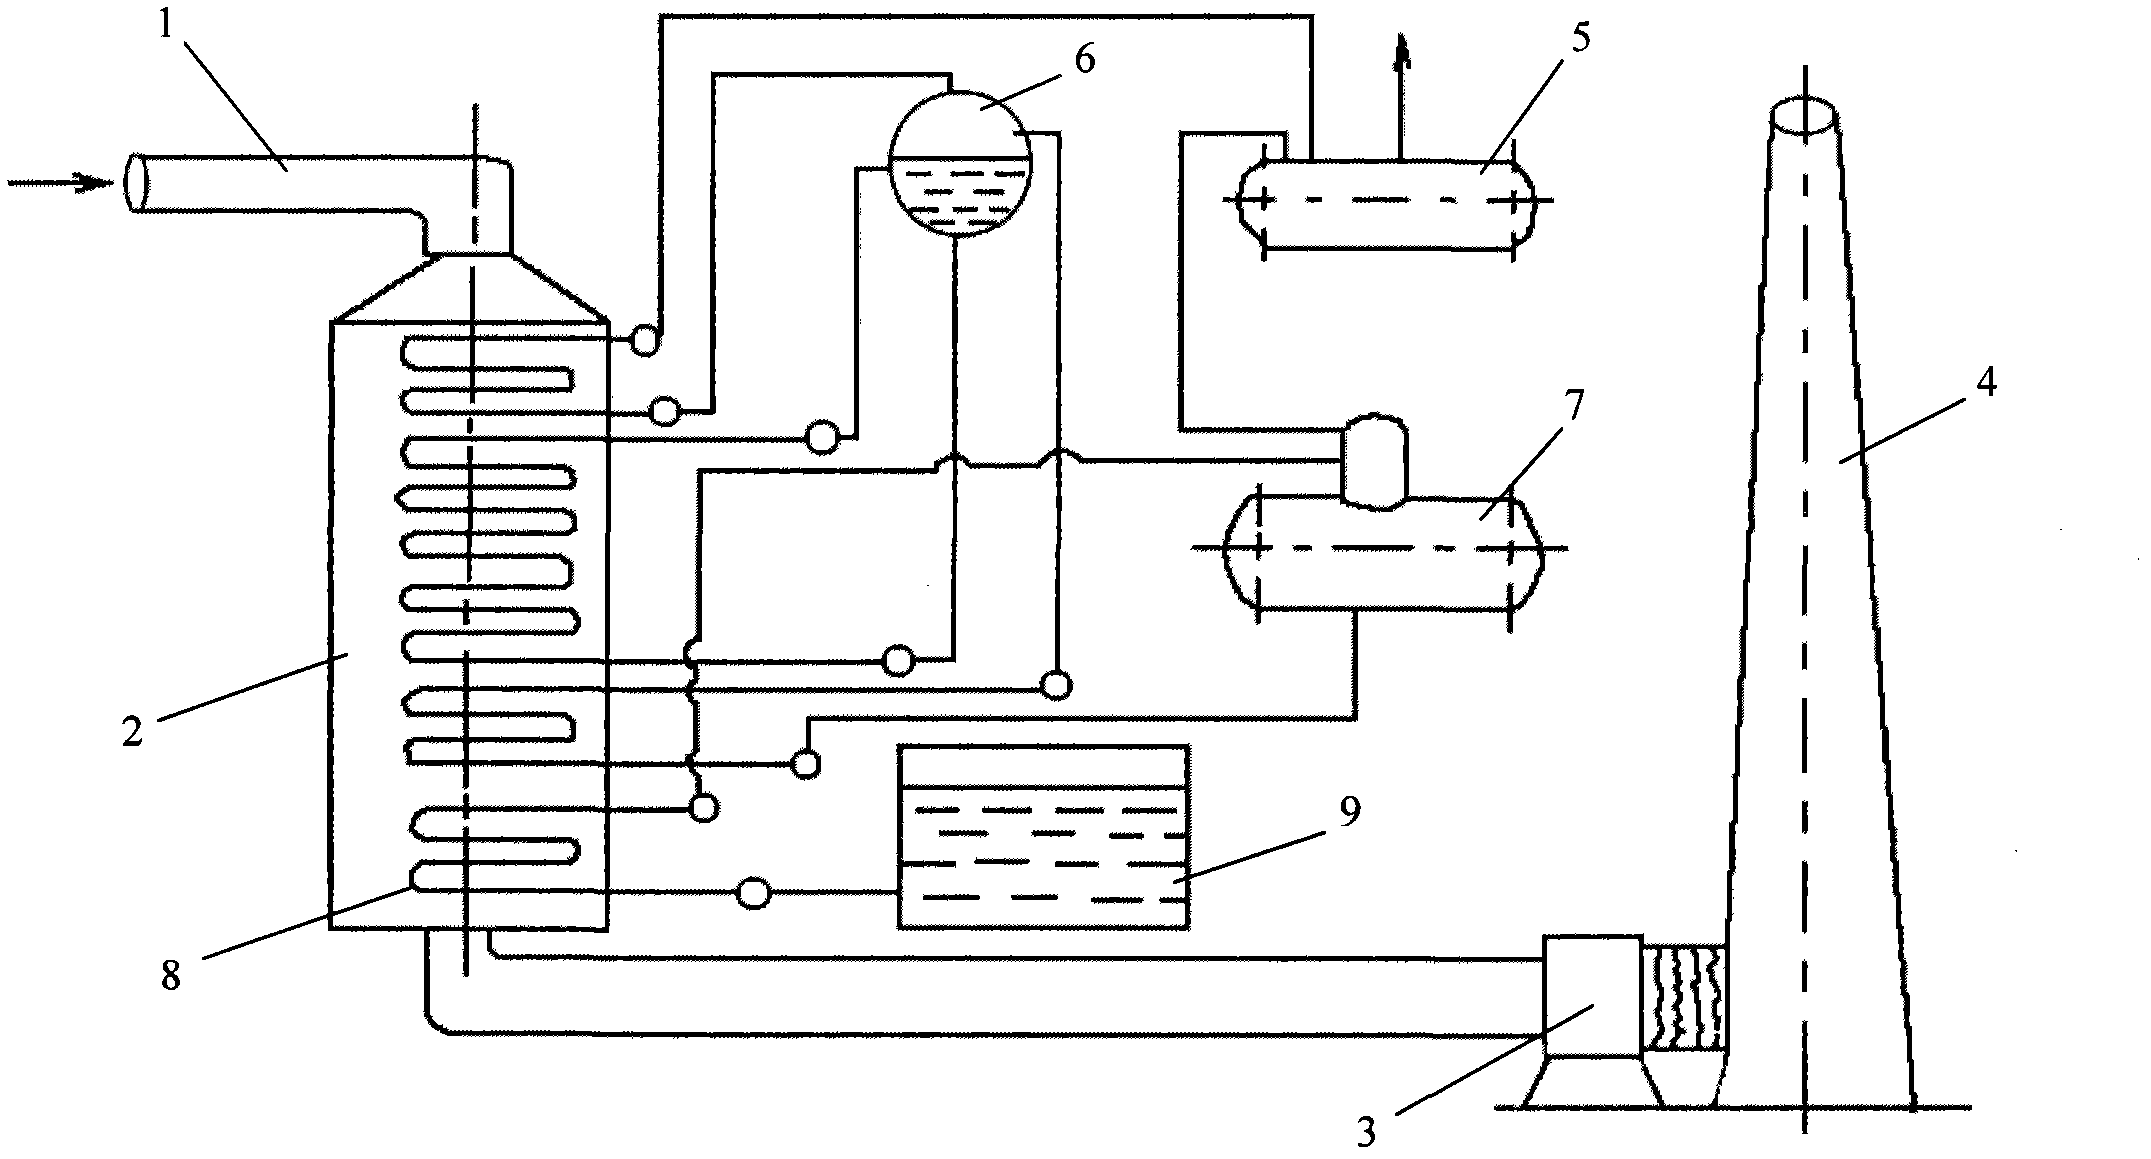 A system for producing steam by using the waste heat of coke oven heating exhaust gas